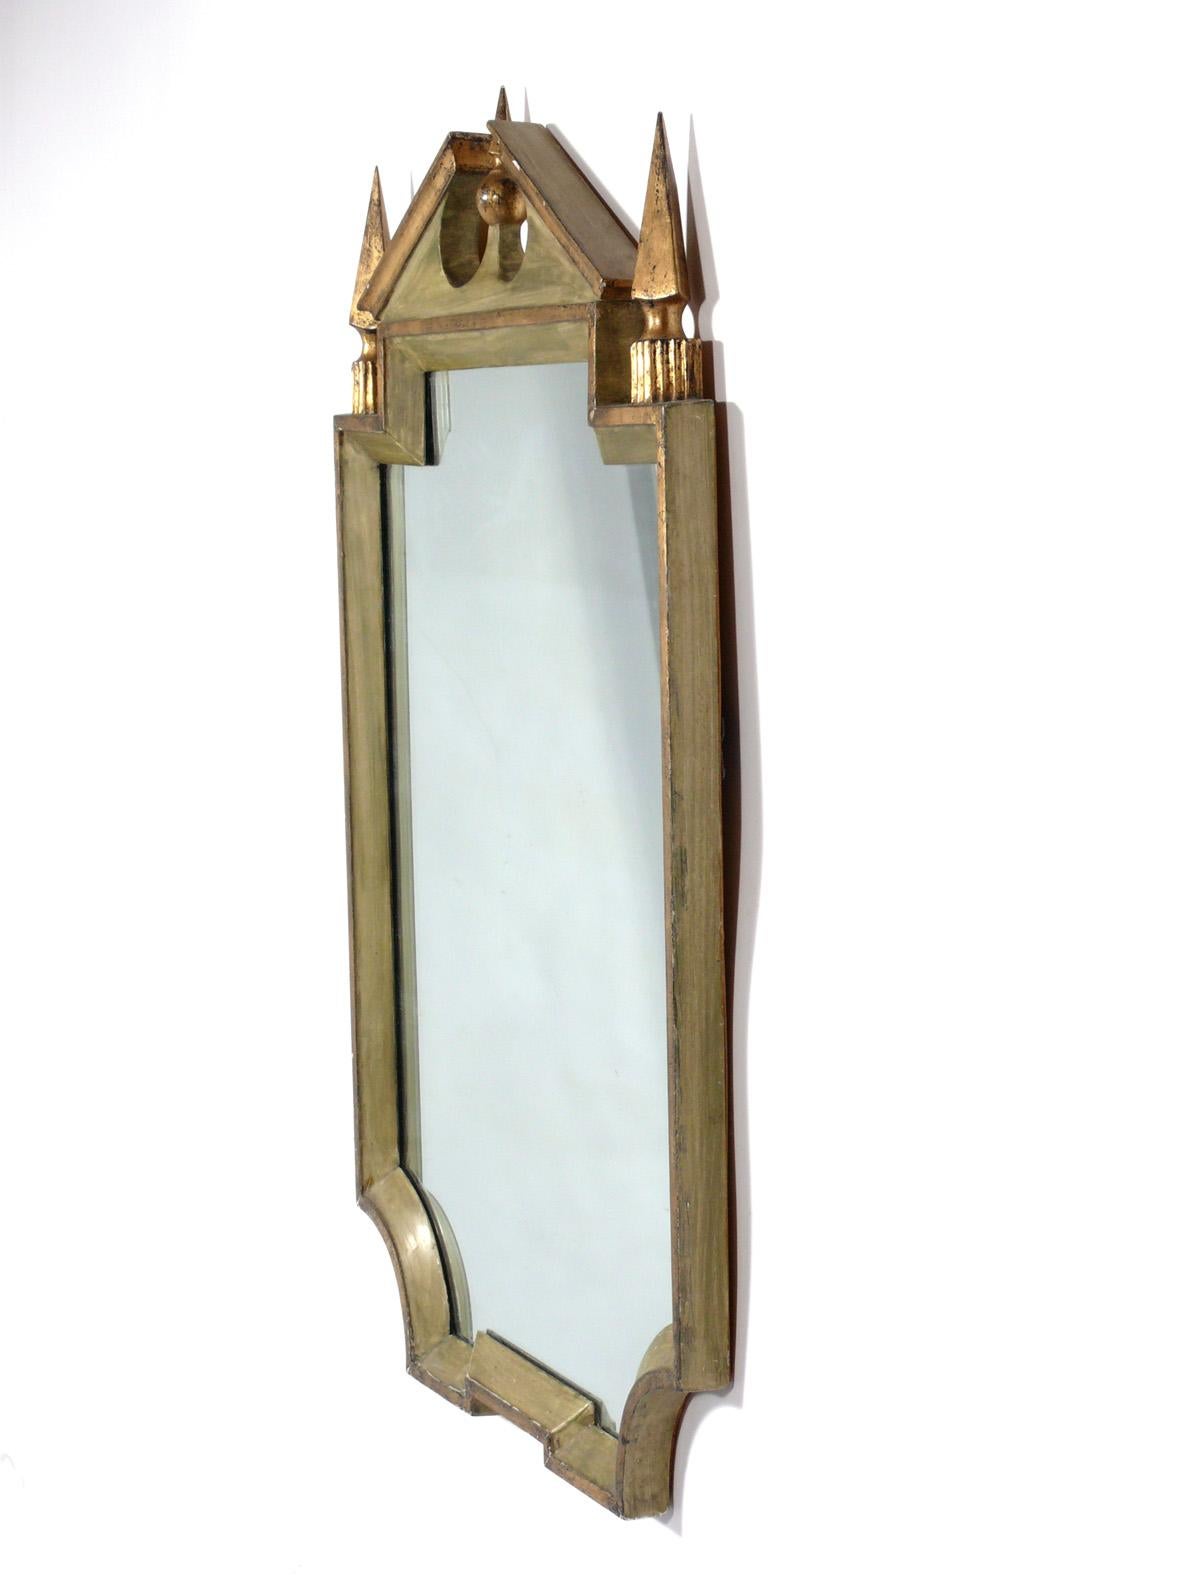 Neoclassical Italian mirror, made by Palladio, Italy, circa 1950s. It is a pale green color with gold gilt accents. Original mirror and frame retain warm original patina.